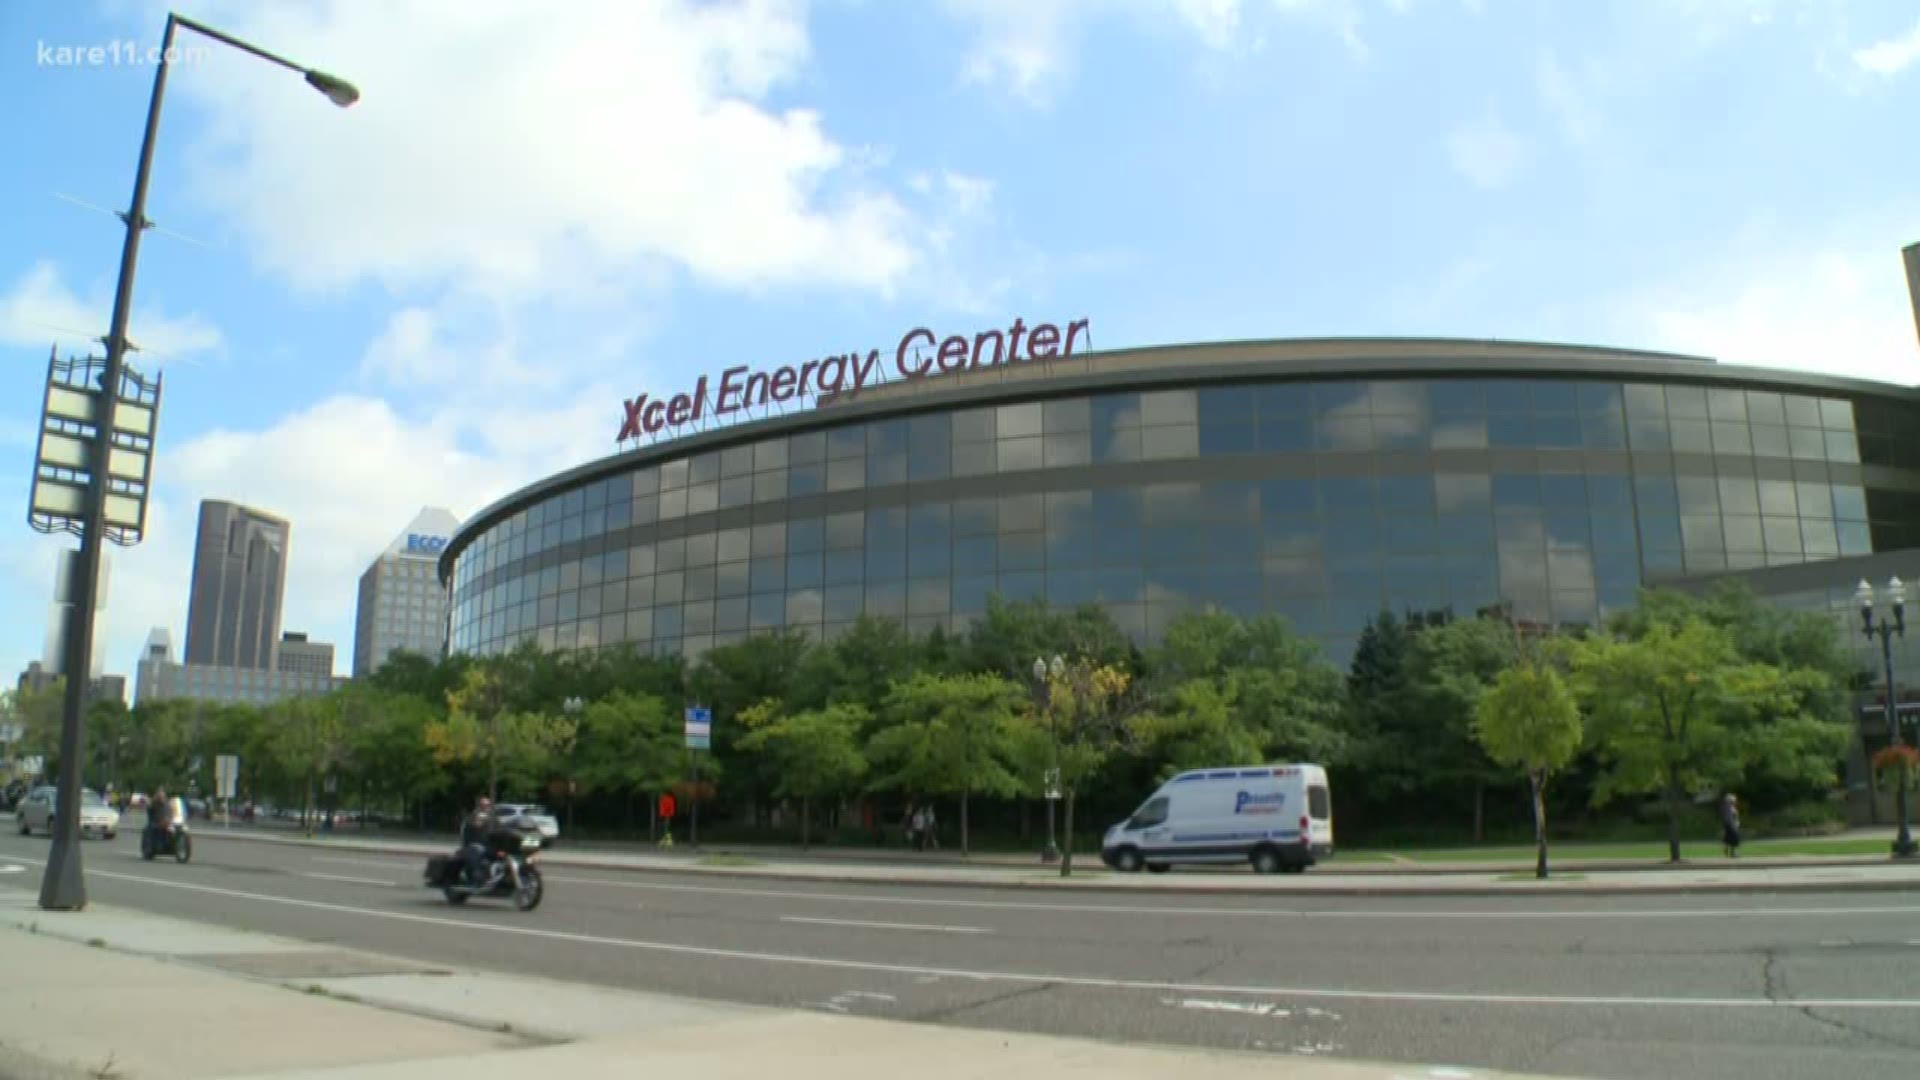 Xcel Energy Center expands bag policy, adds cashless payments